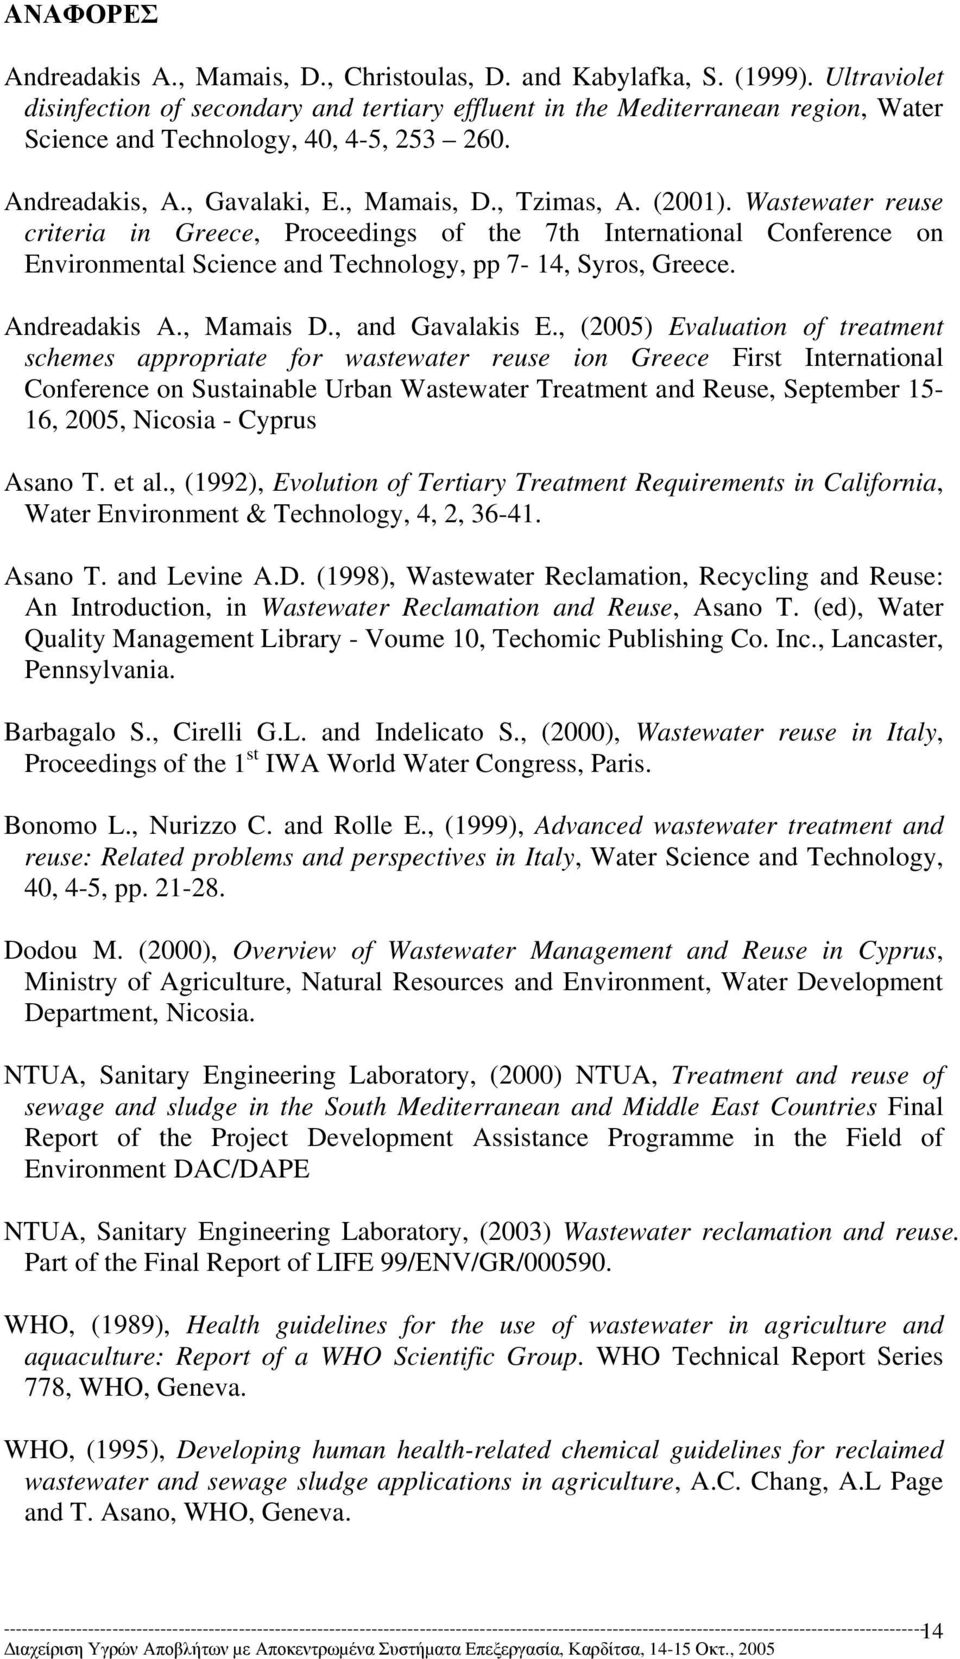 Wastewater reuse criteria in Greece, Proceedings of the 7th International Conference on Environmental Science and Technology, pp 7-14, Syros, Greece. Andreadakis A., Mamais D., and Gavalakis E.